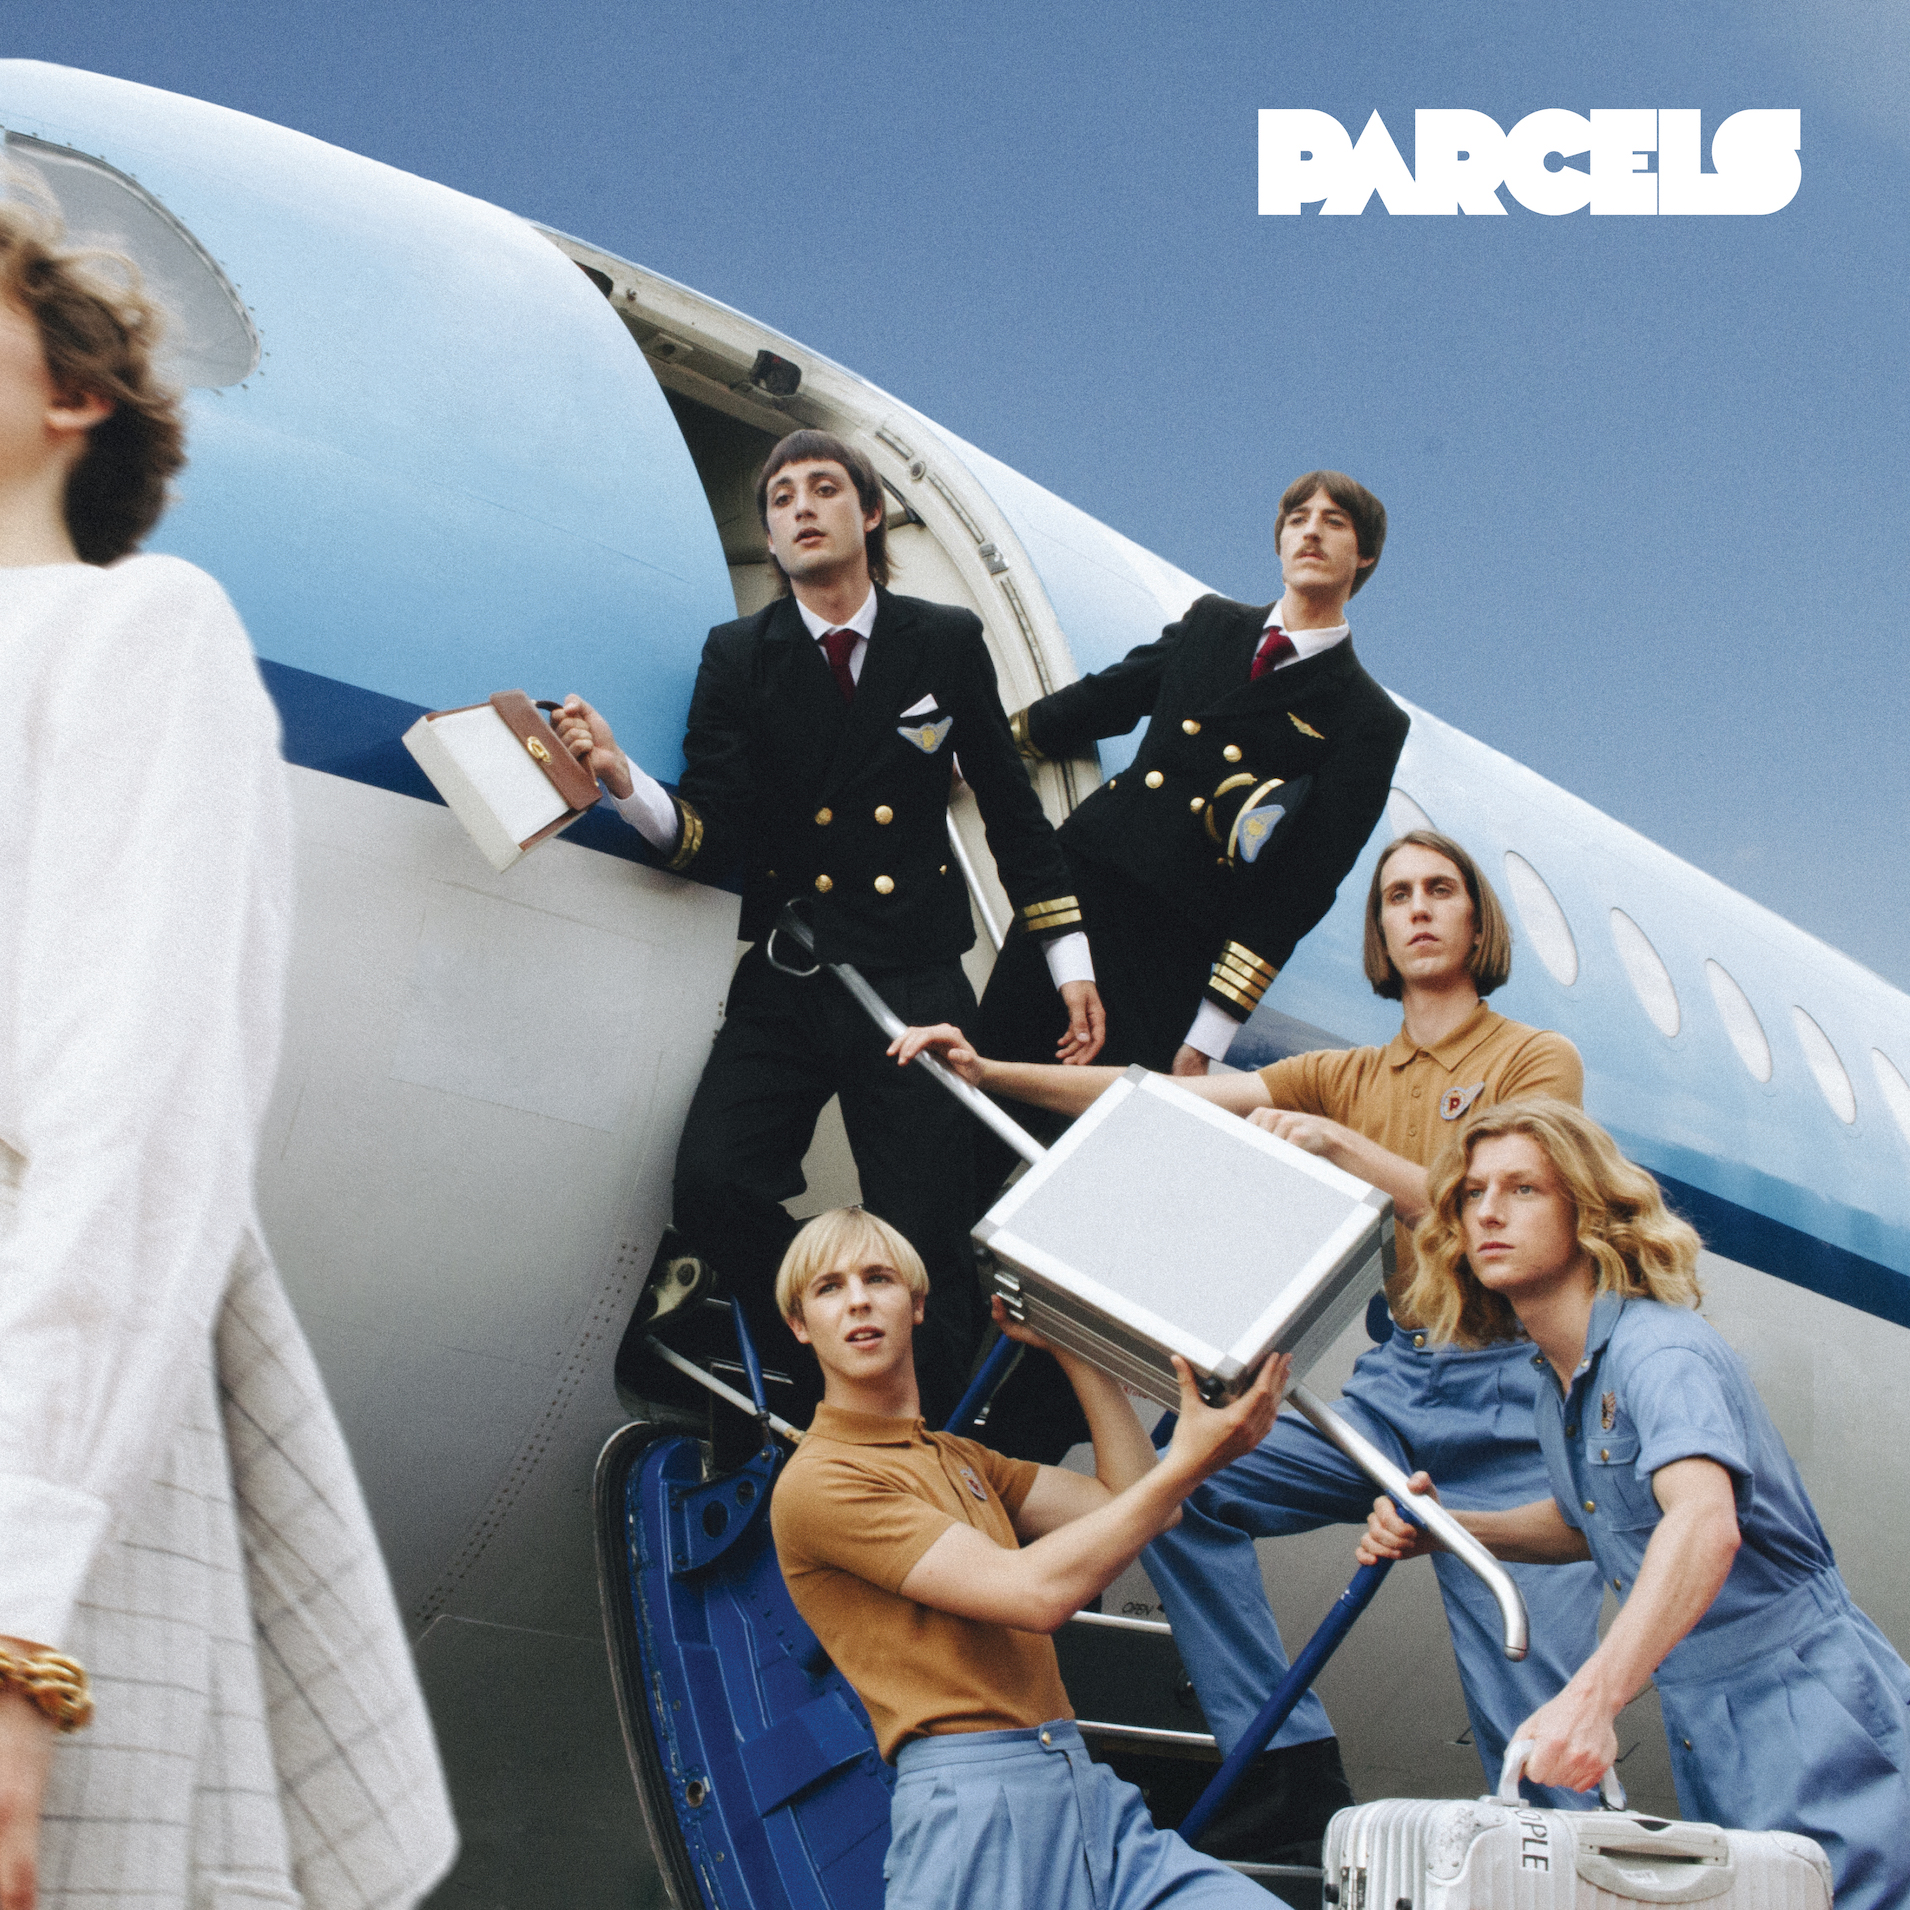 Parcels Have Finally Unveiled Their MuchAnticipated Debut Album